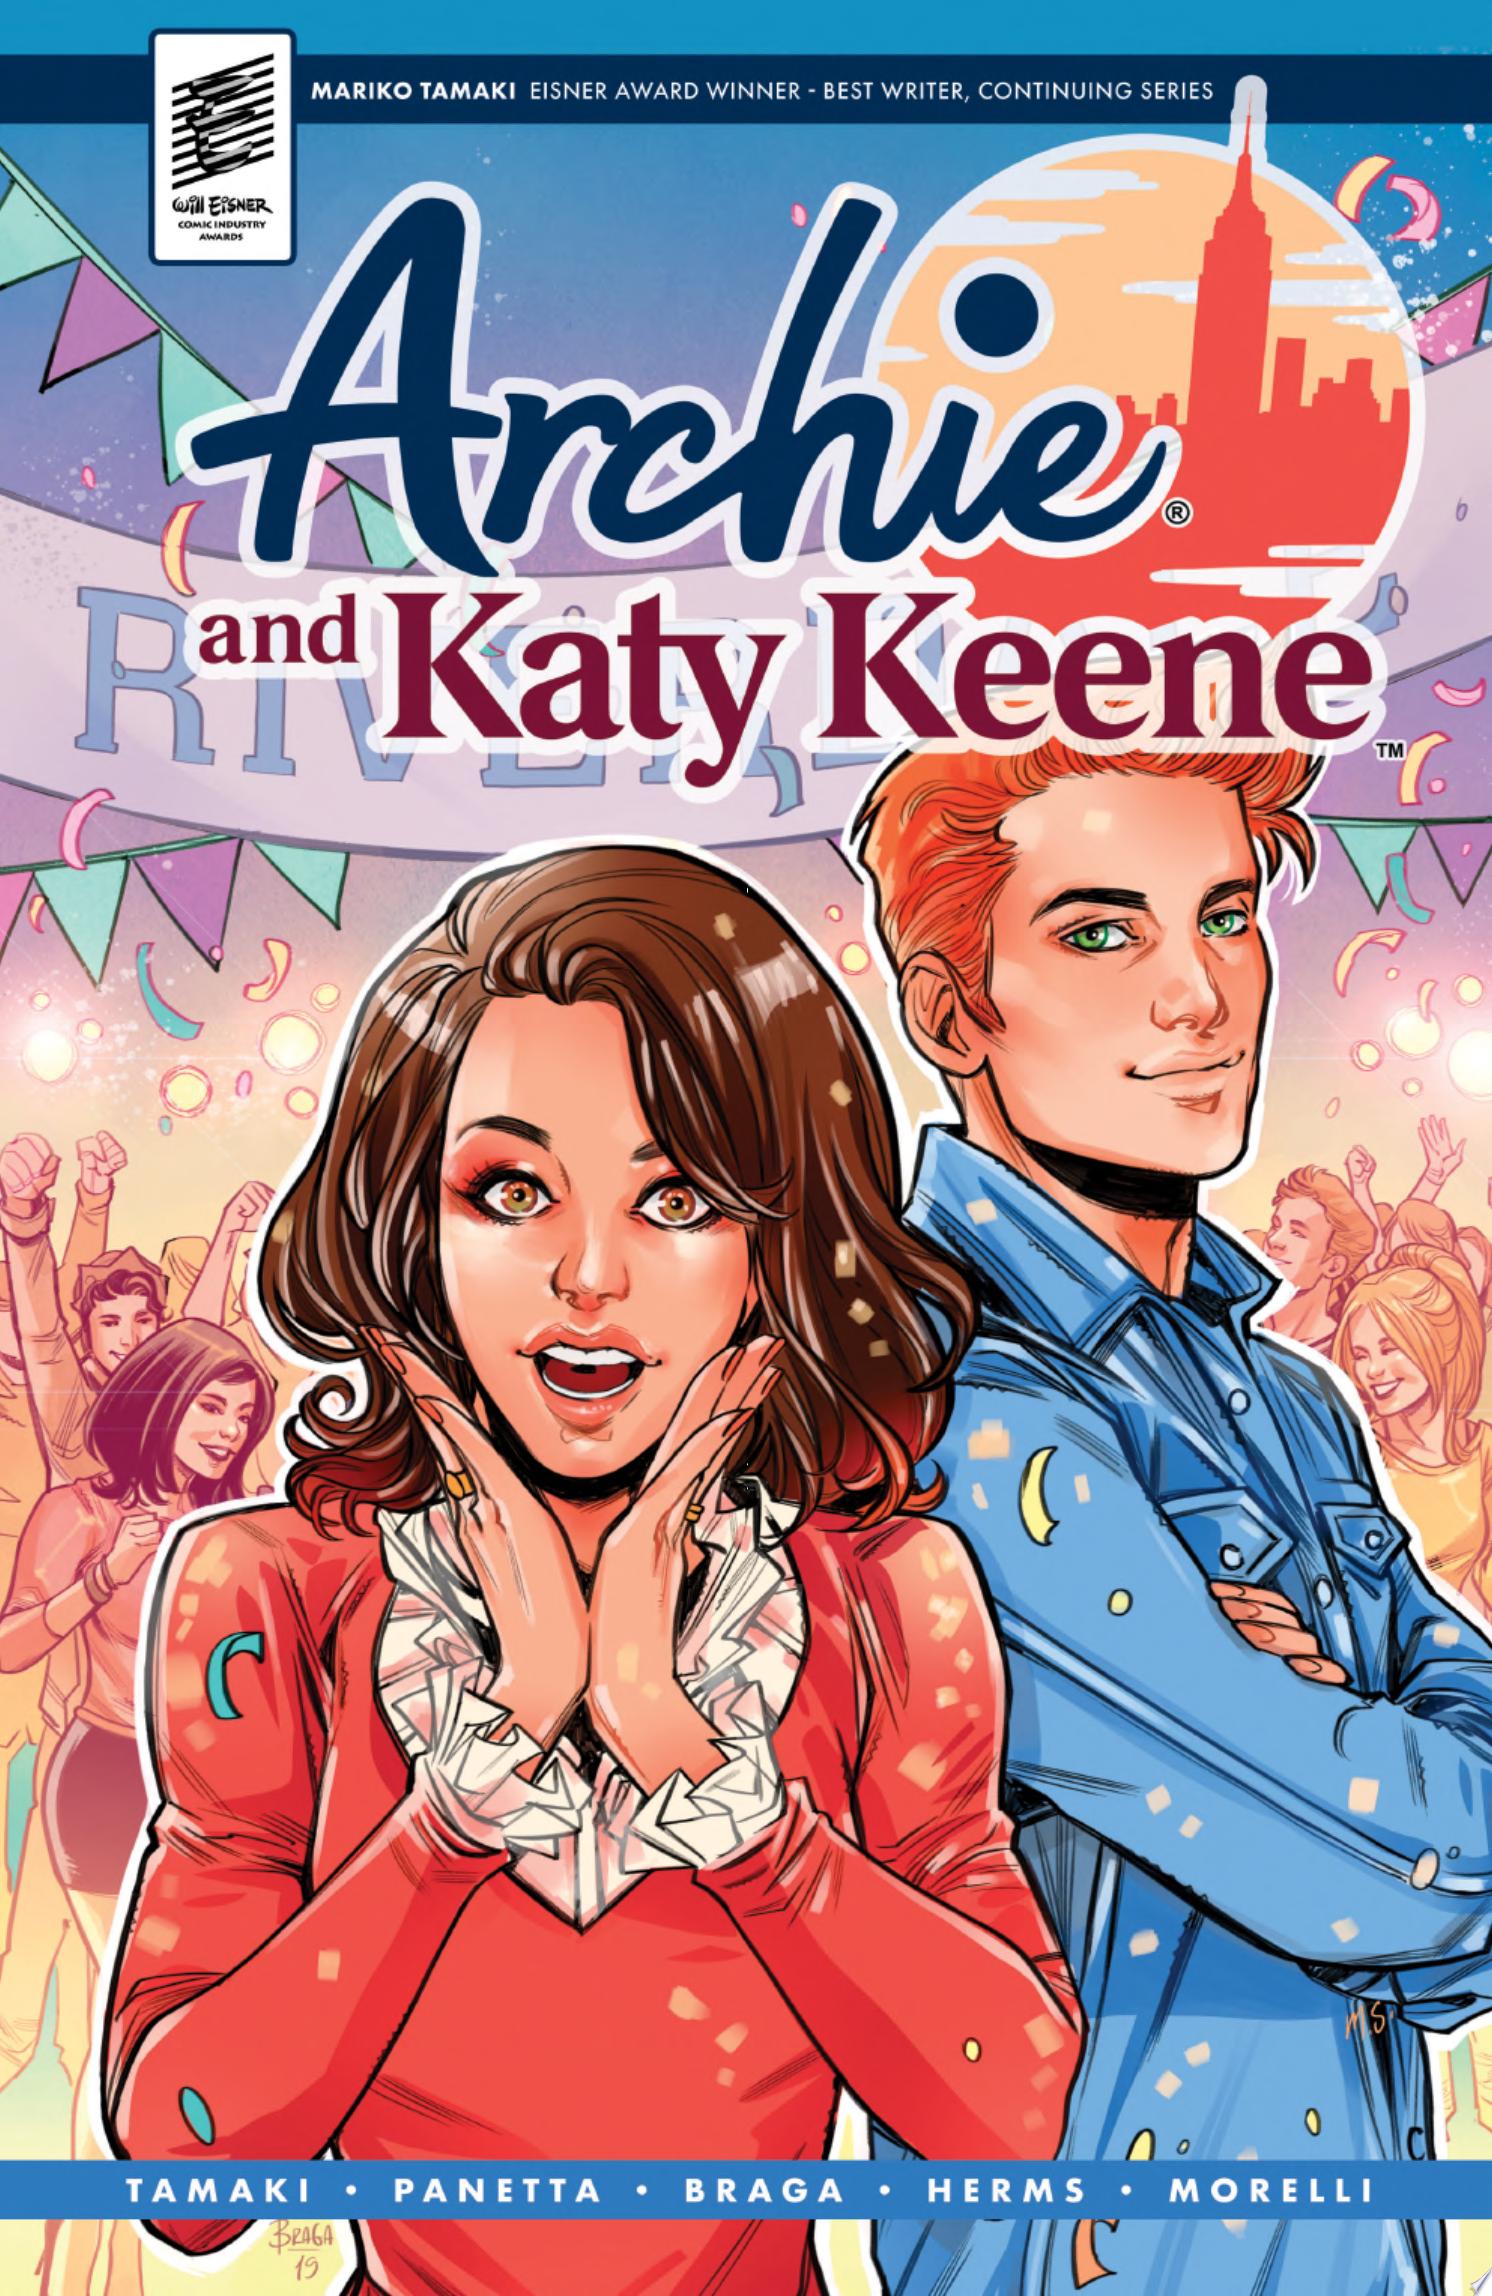 Image for "Archie & Katy Keene"